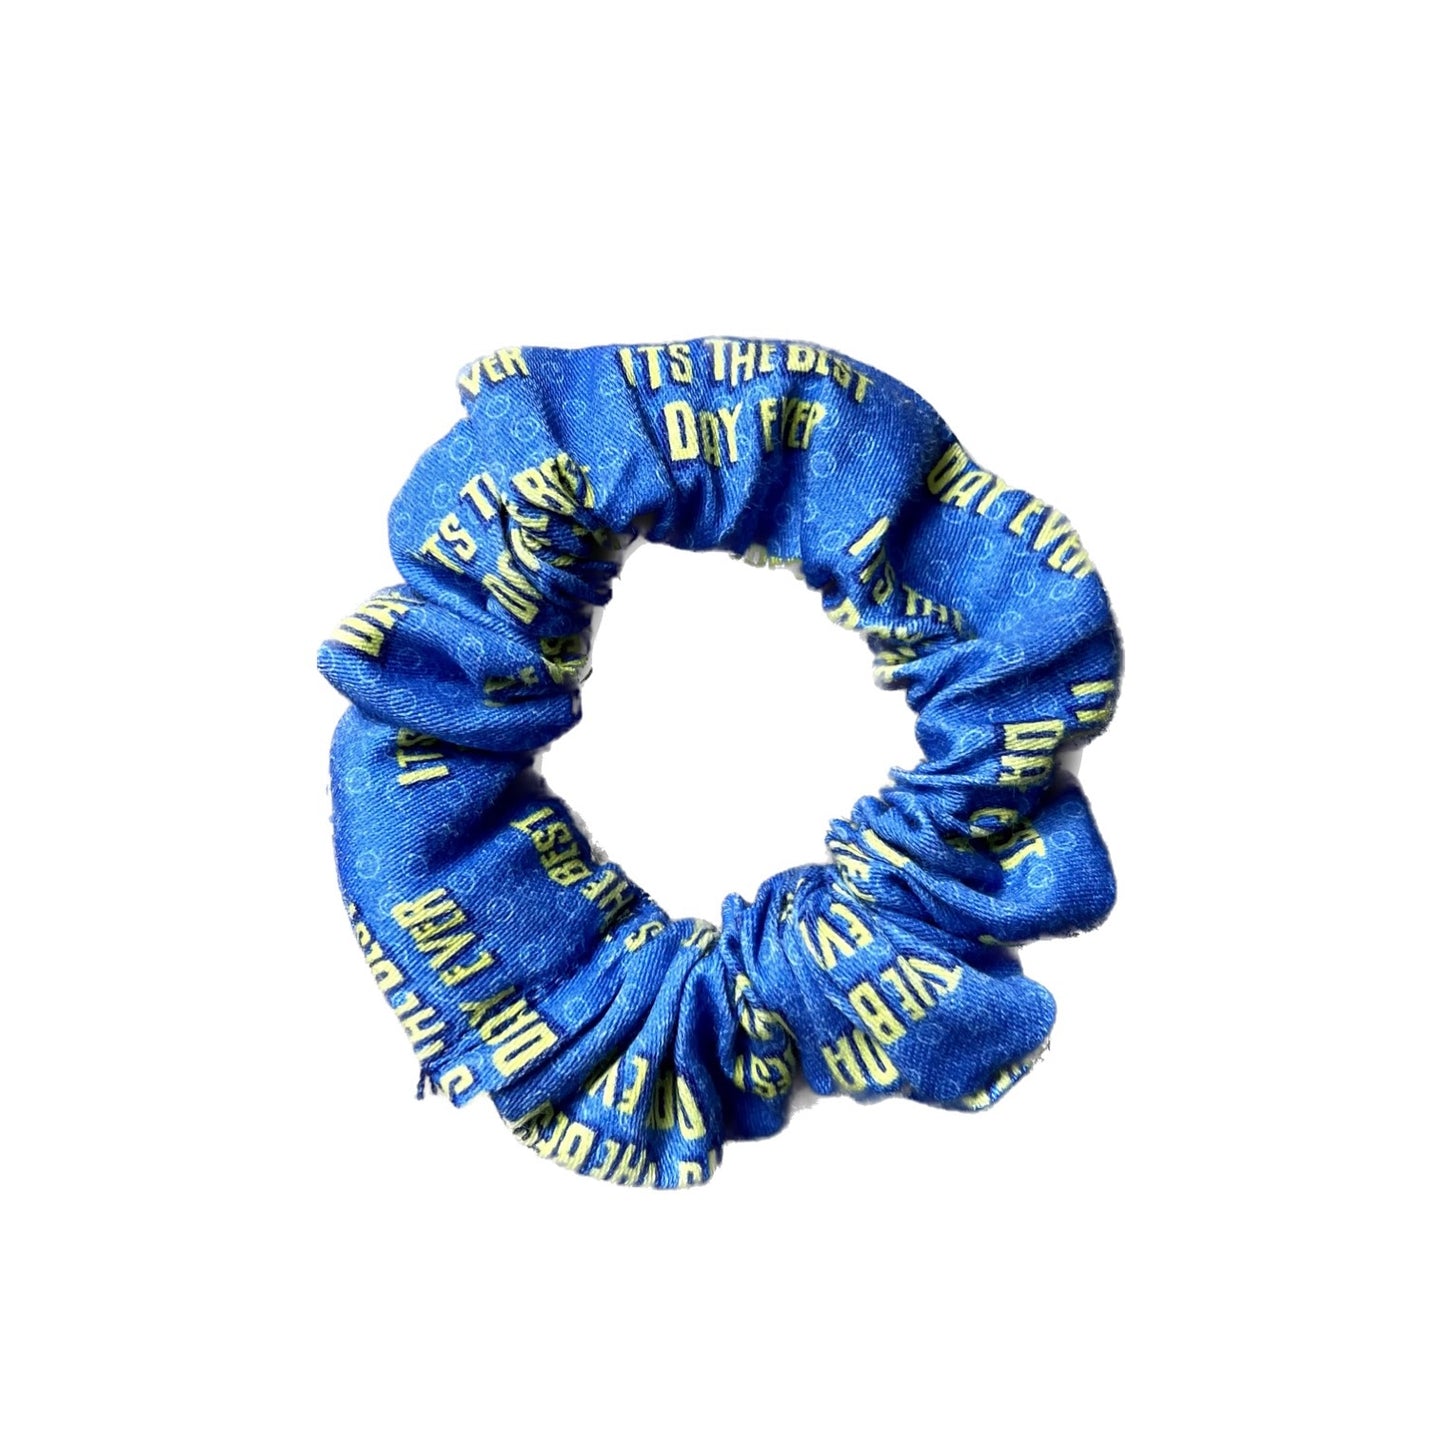 It’s The Best Day Ever Scrunchie - Inspired by SpongeBob SquarePants: The Musical